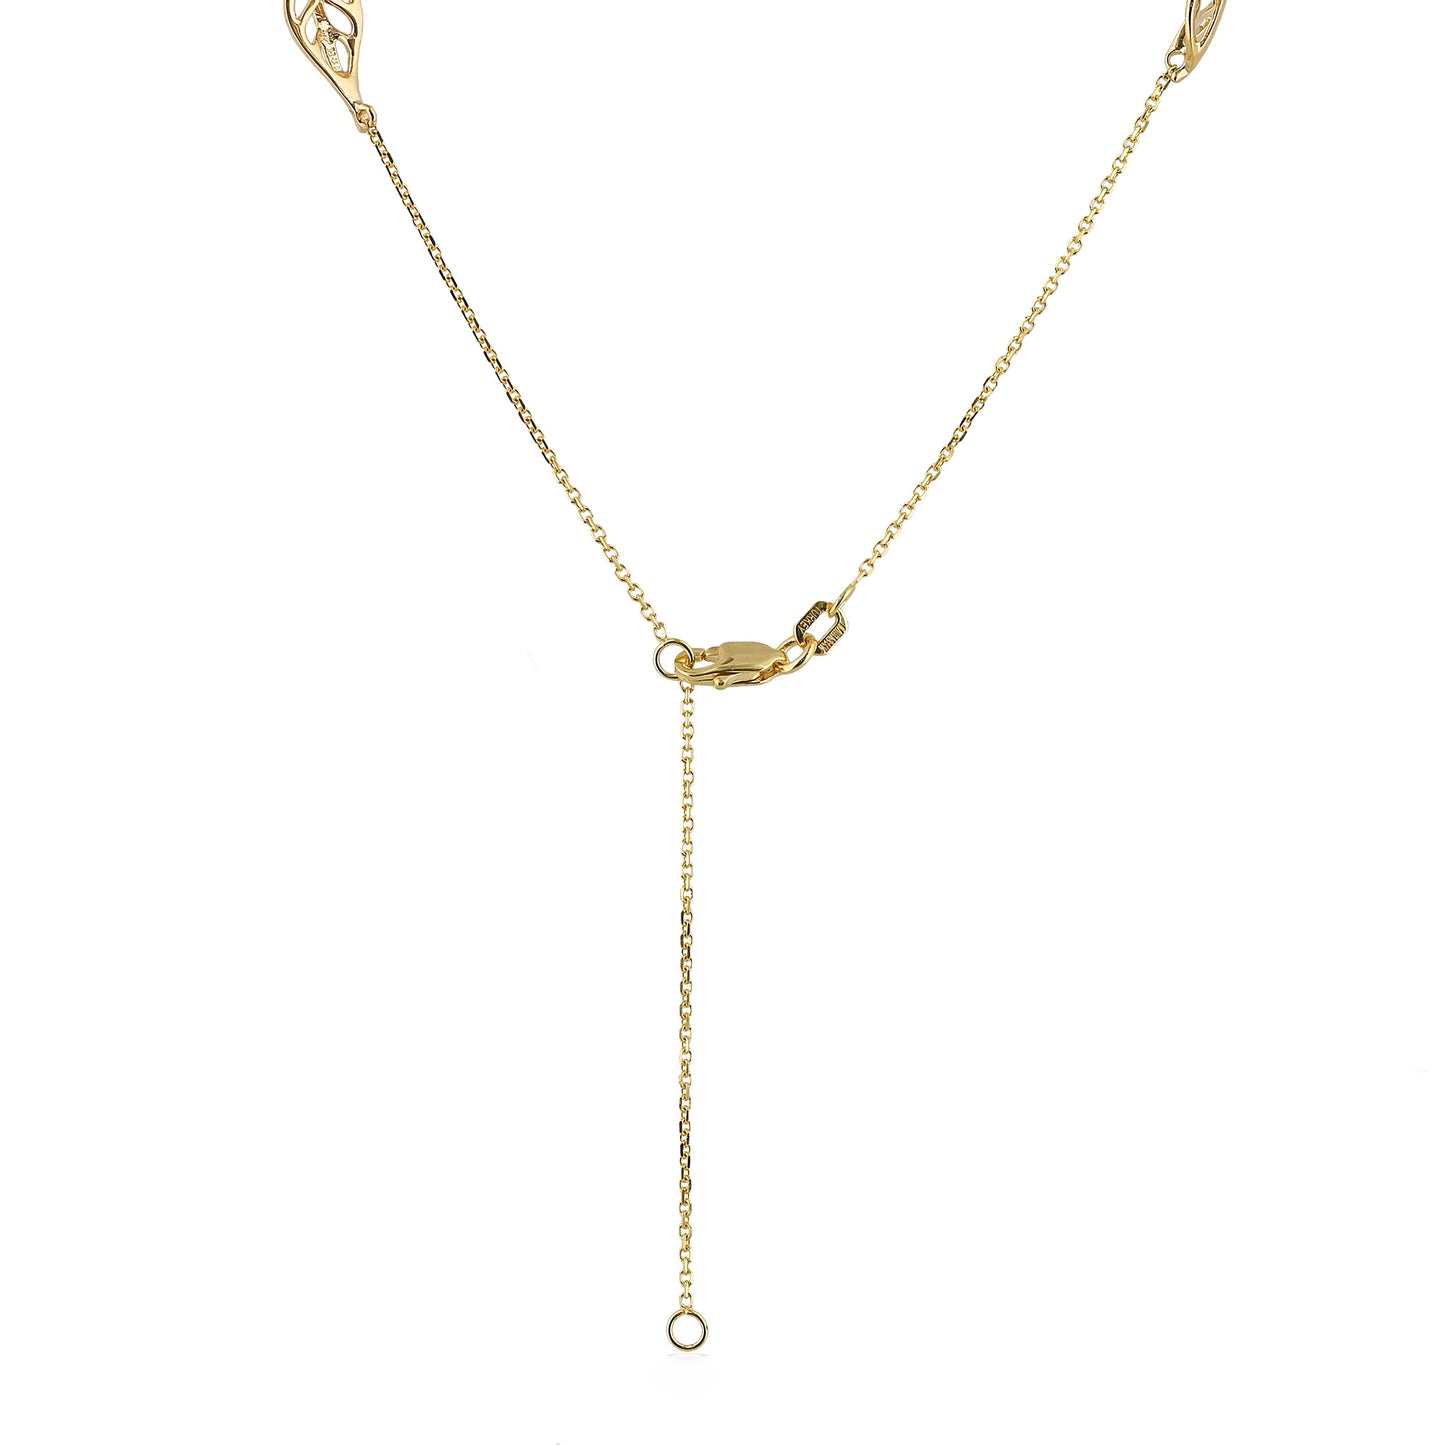 44609 - 14K Yellow Gold - Maile Leaf Necklace